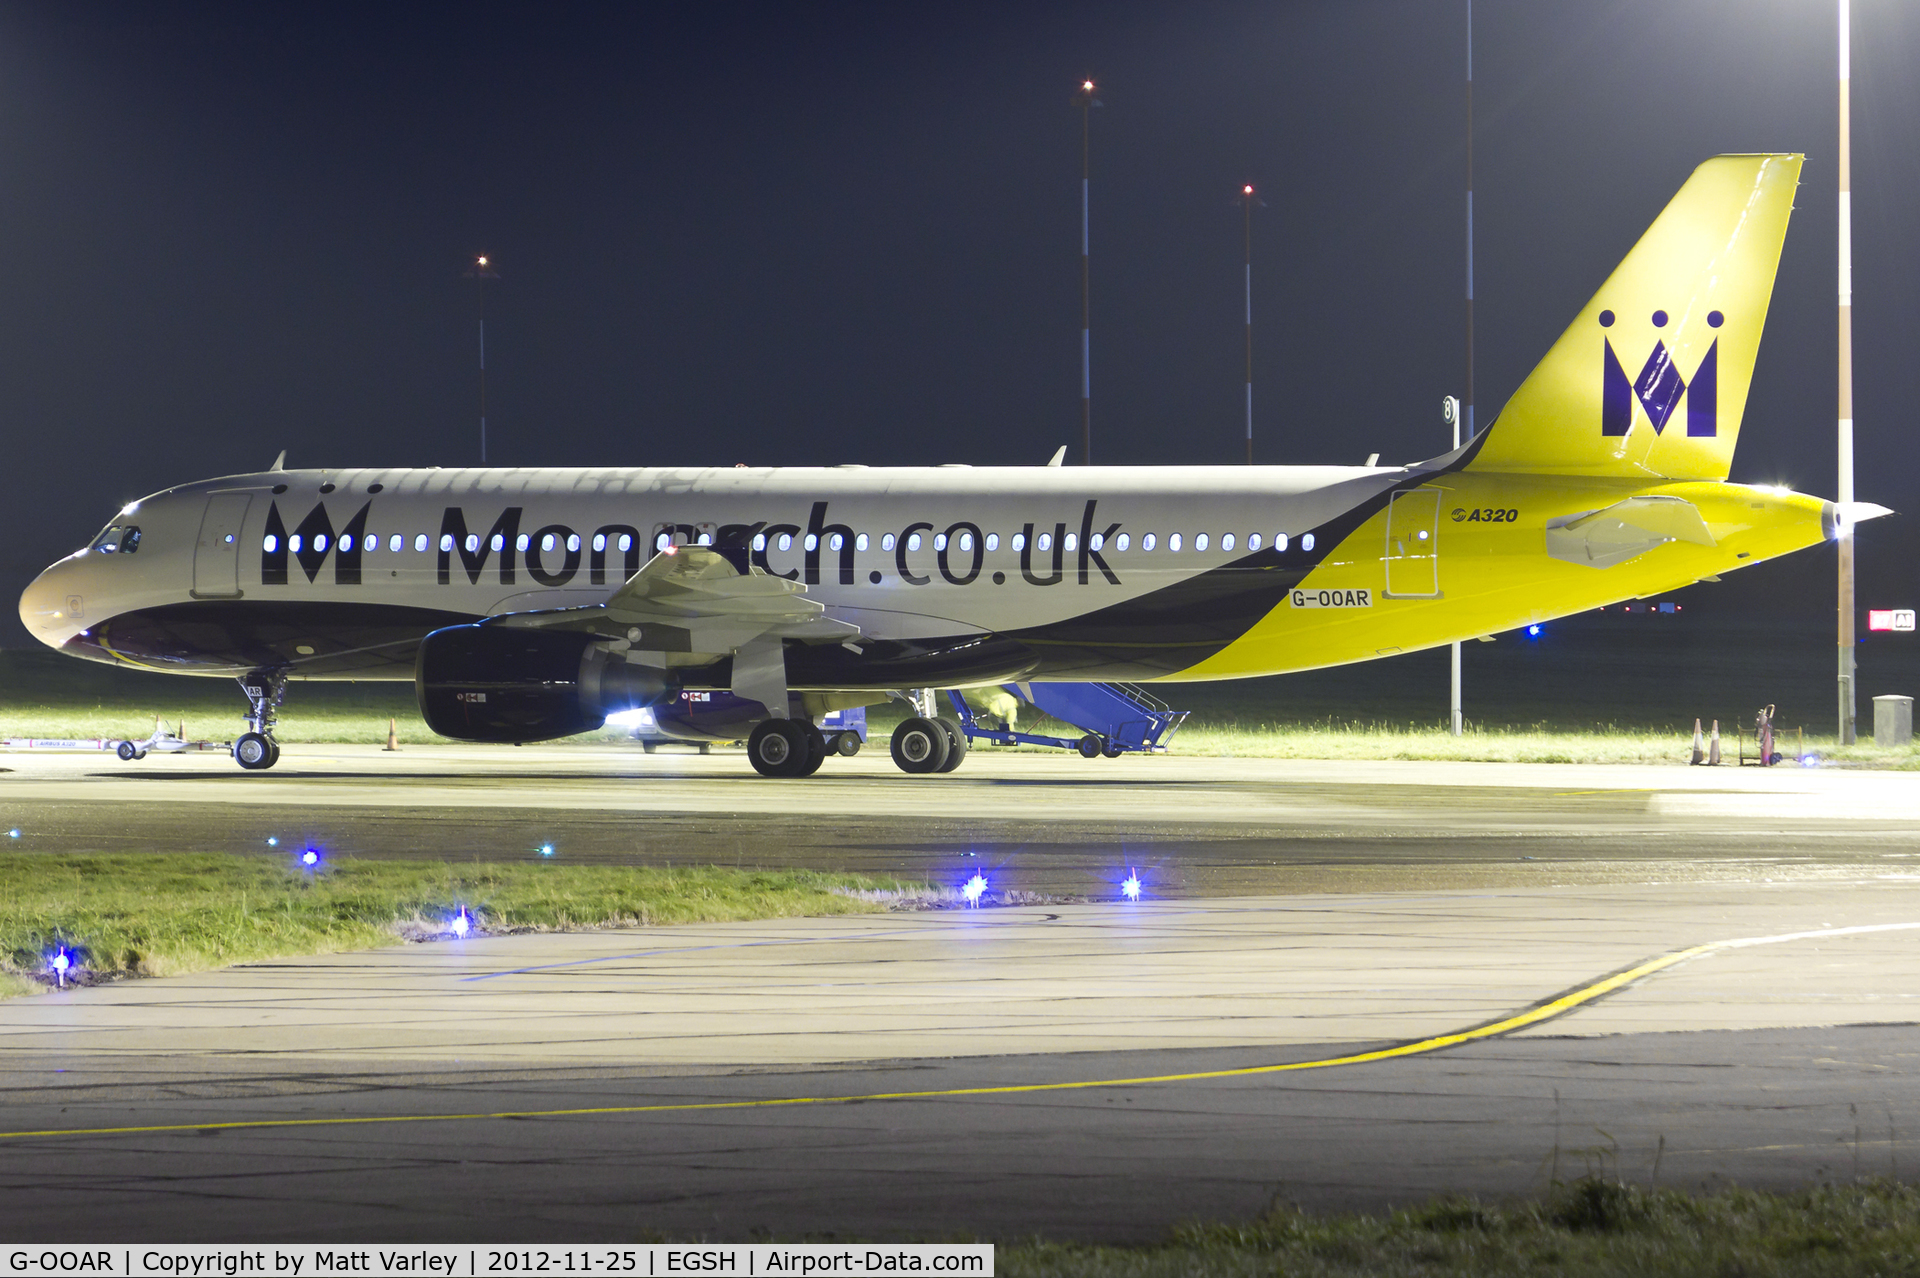 G-OOAR, 2000 Airbus A320-214 C/N 1320, Fresh out of spray in Monarch Airlines C/S. ( To become G-OZBY)